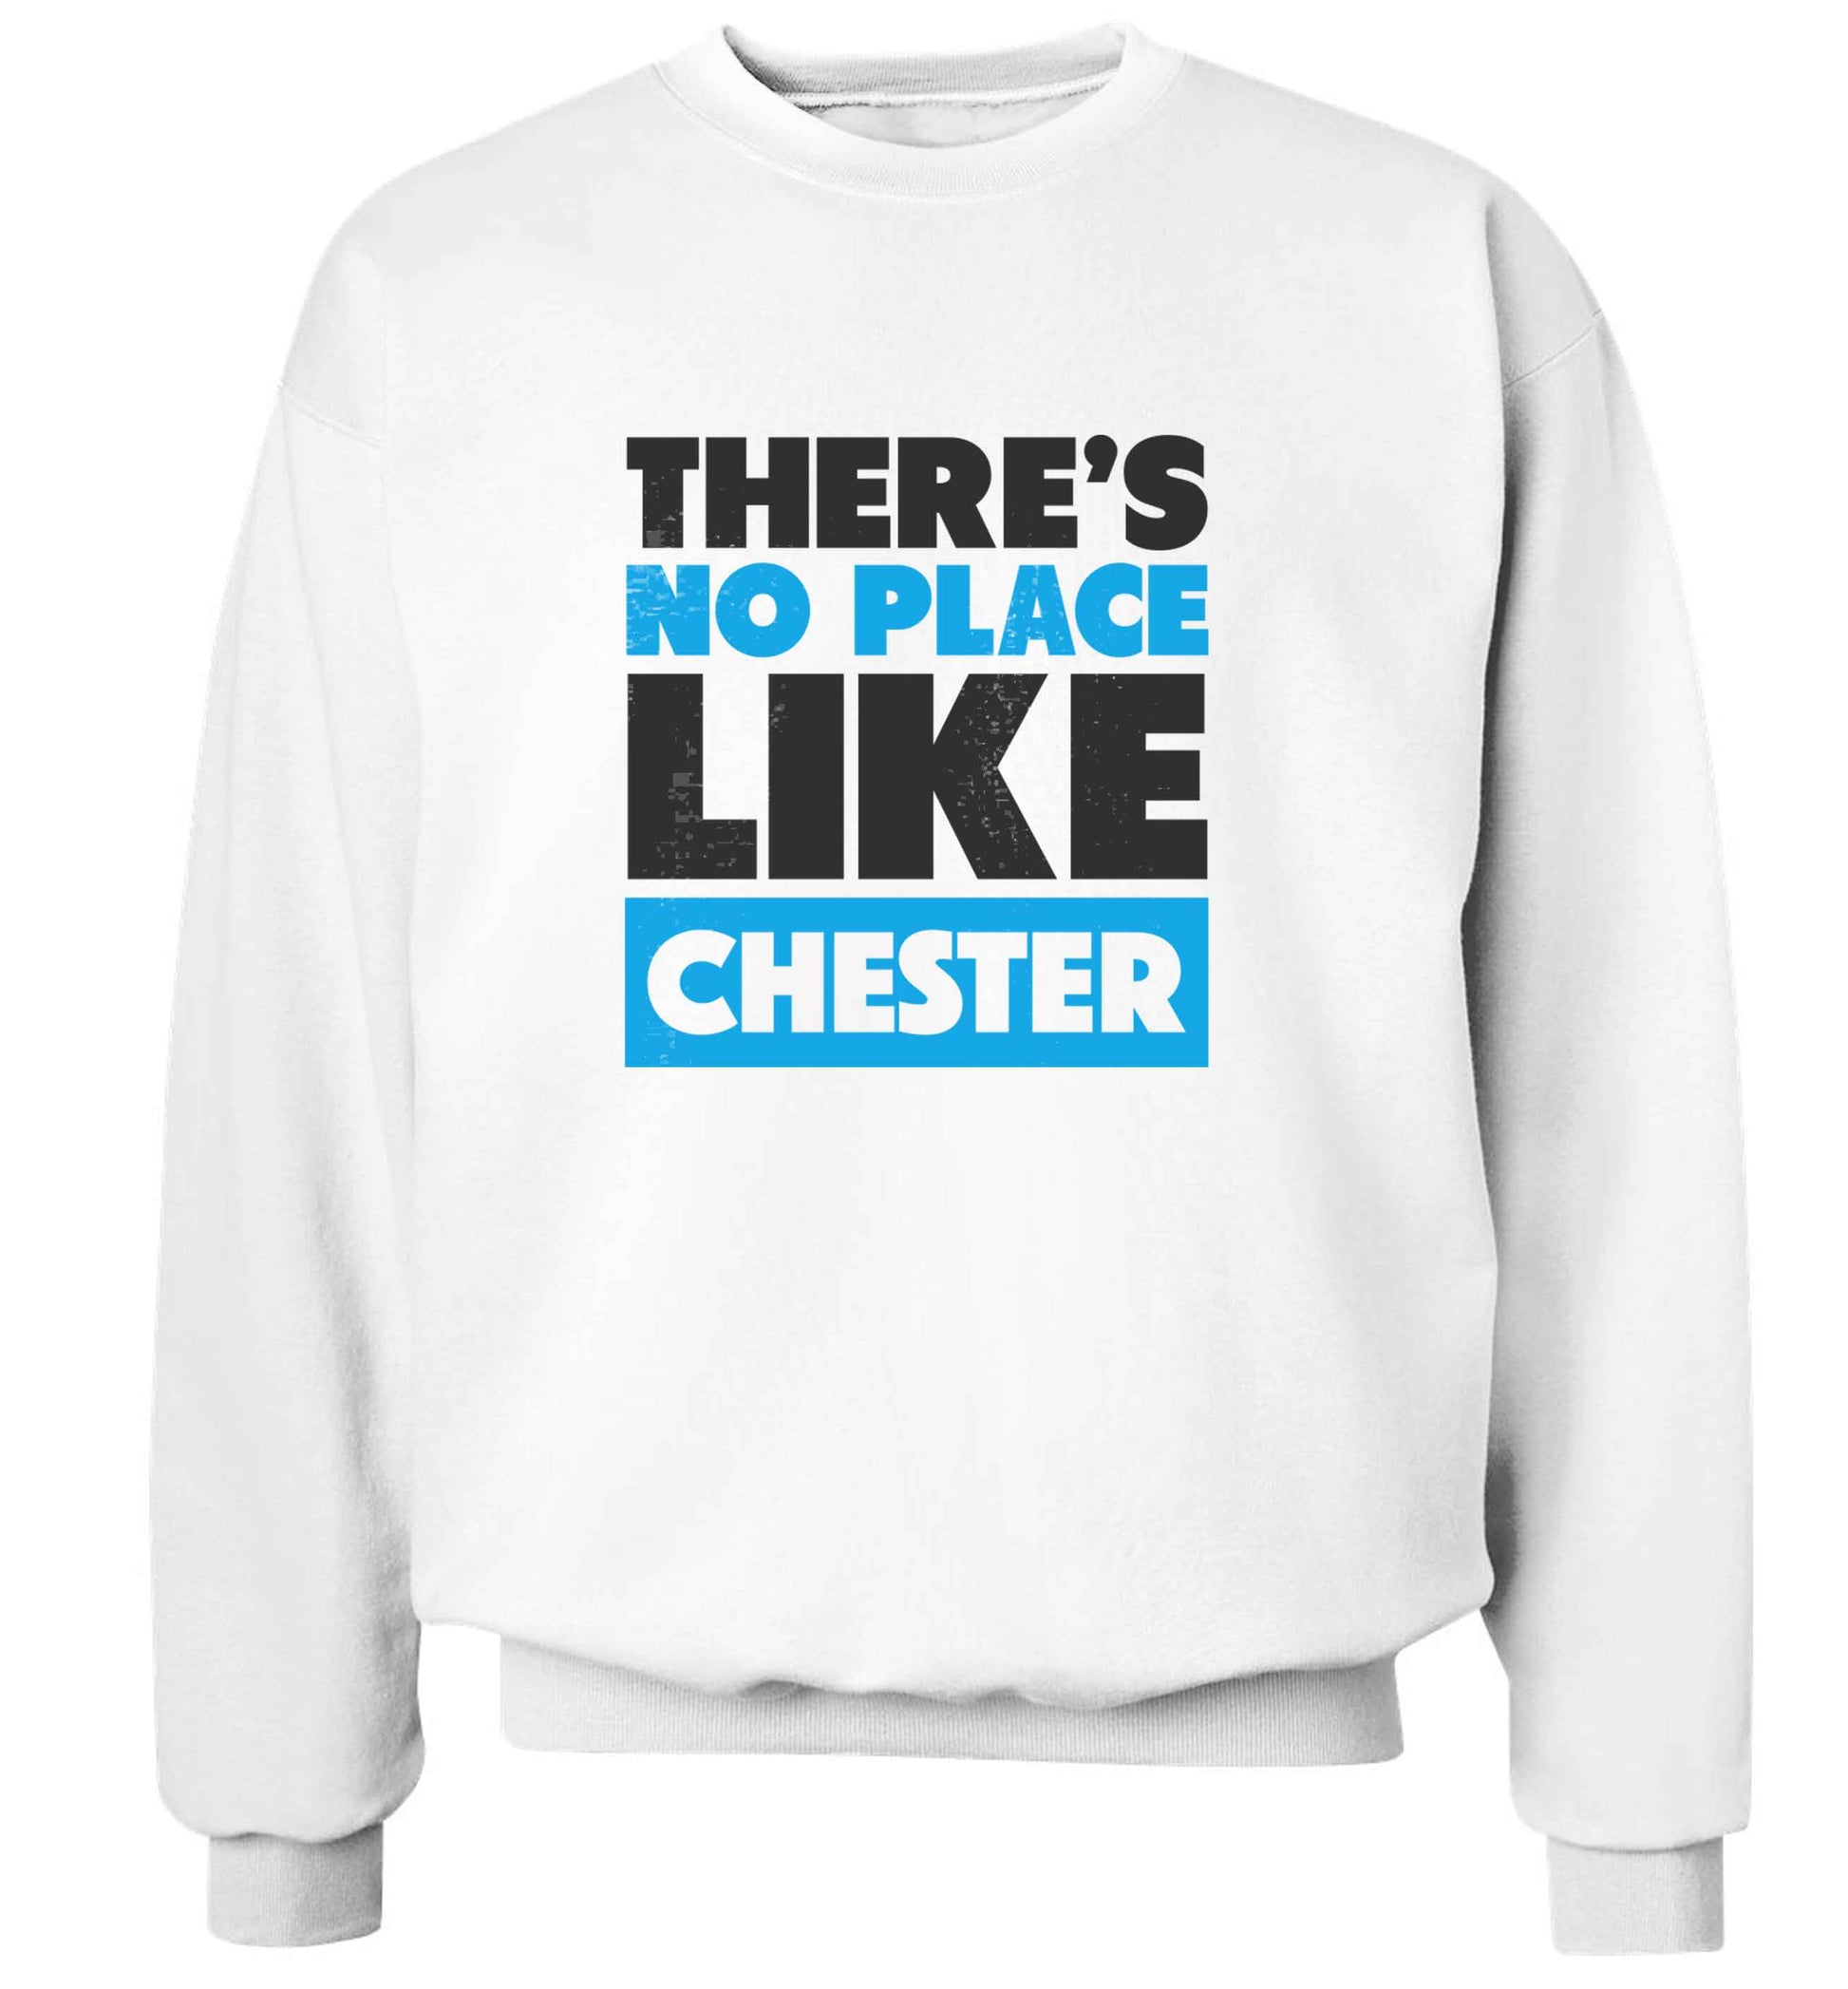 There's no place like Chester adult's unisex white sweater 2XL